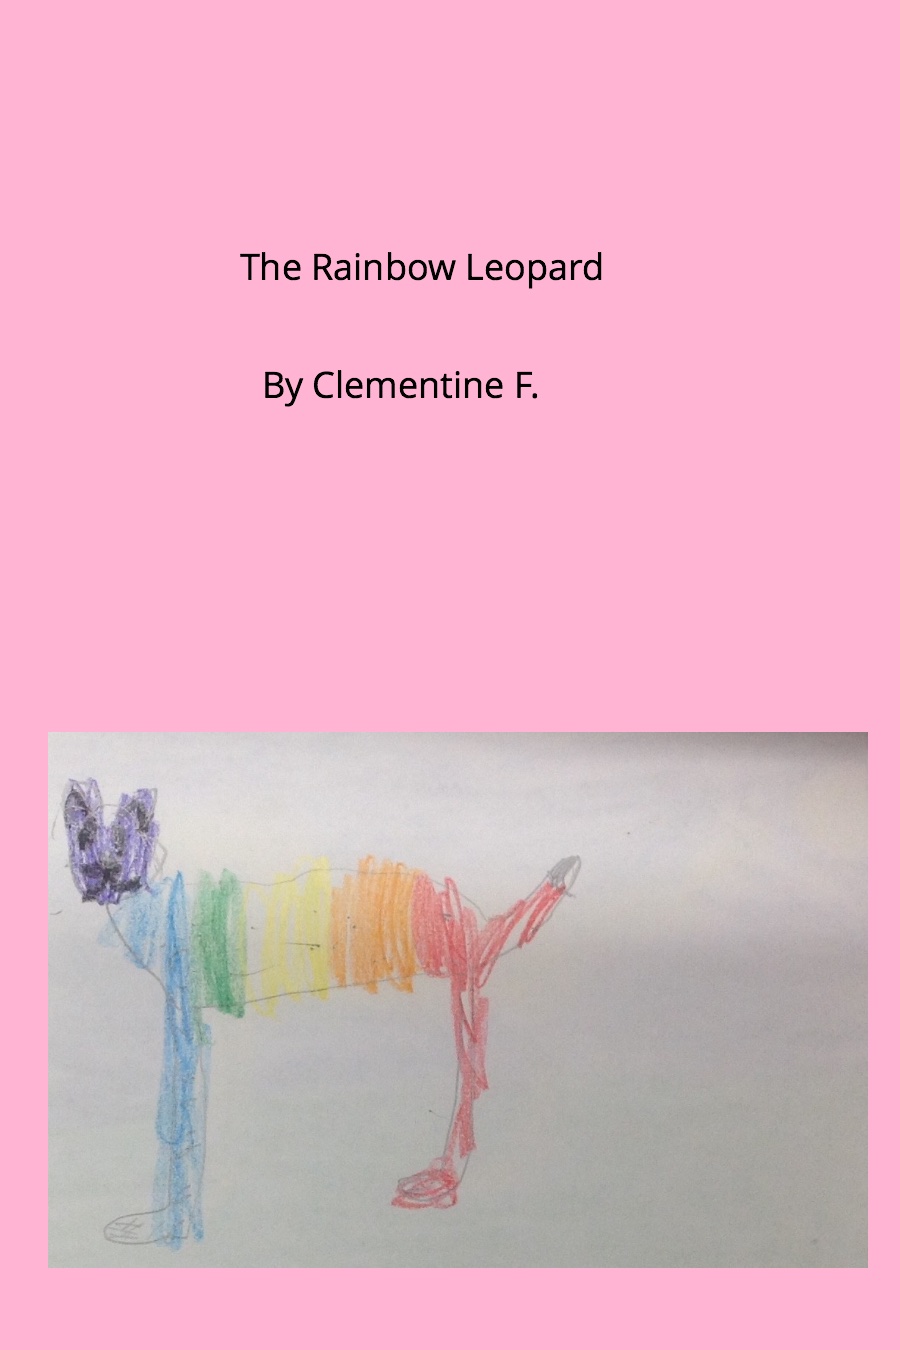 The Rainbow Leopard by Clementine F